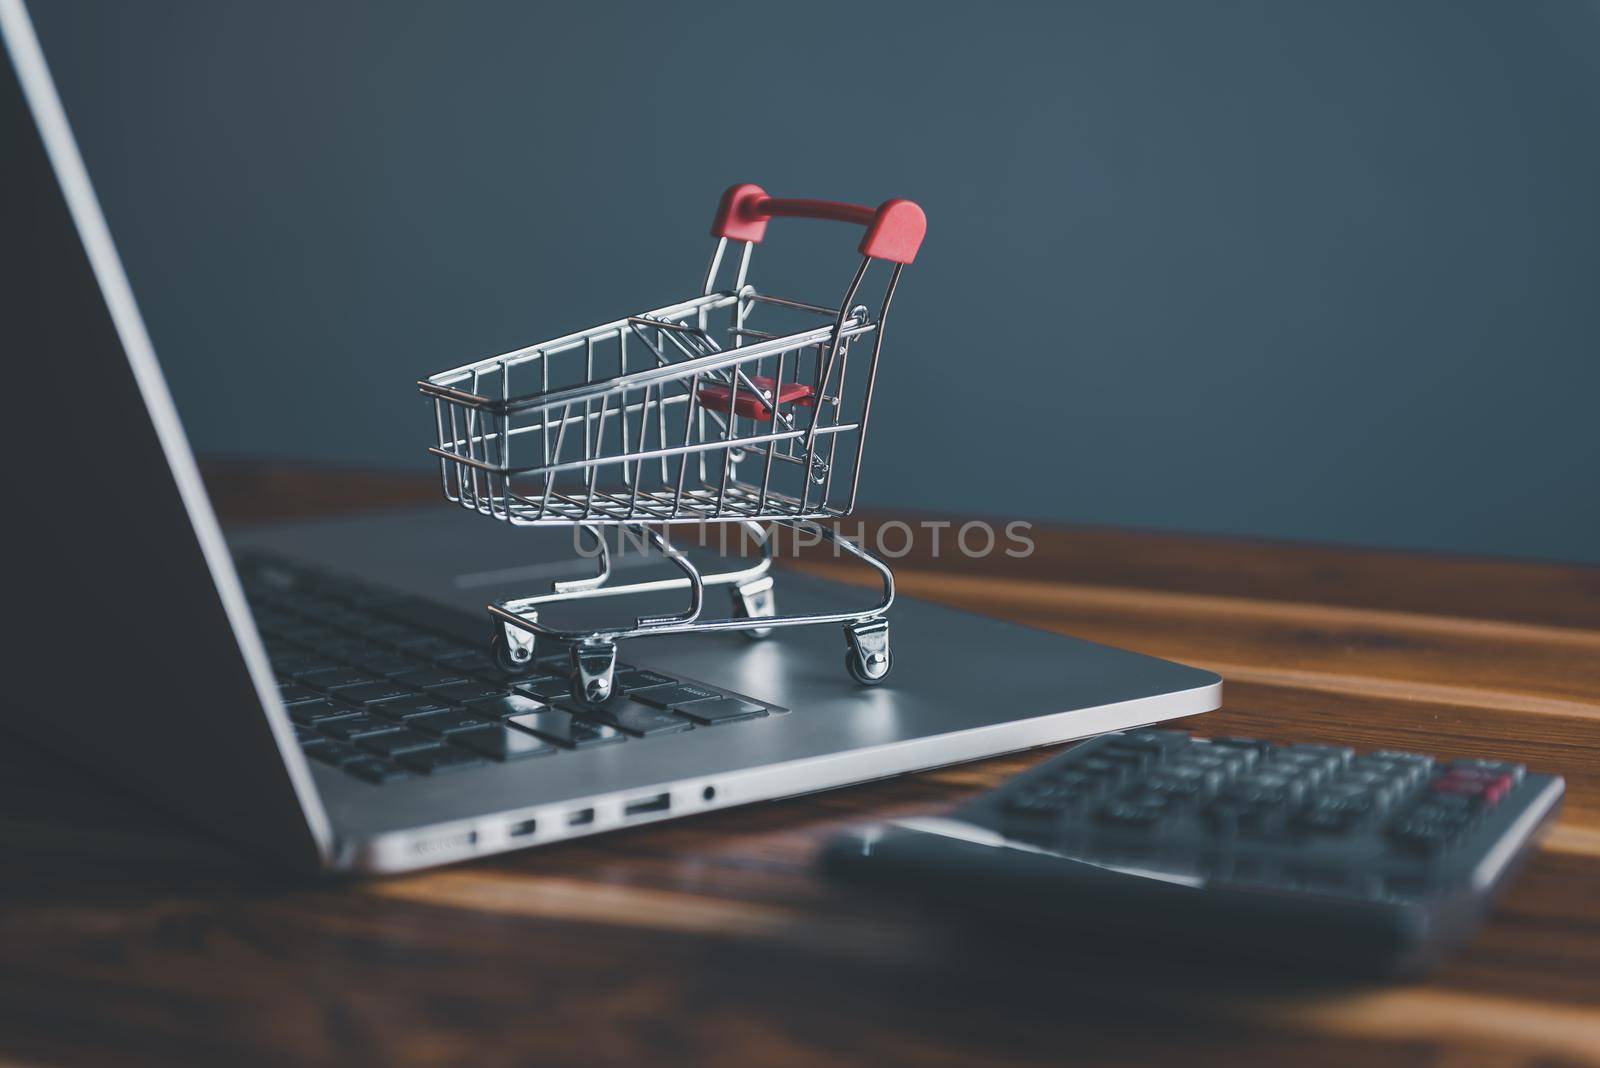 Mini Shopping Cart on Computer Laptop for Market E-Commerce Advertisement Concepts. Market E-commerce, Online Shopping Concept, Business Marketing Ecommerce Via Online Network. by MahaHeang245789